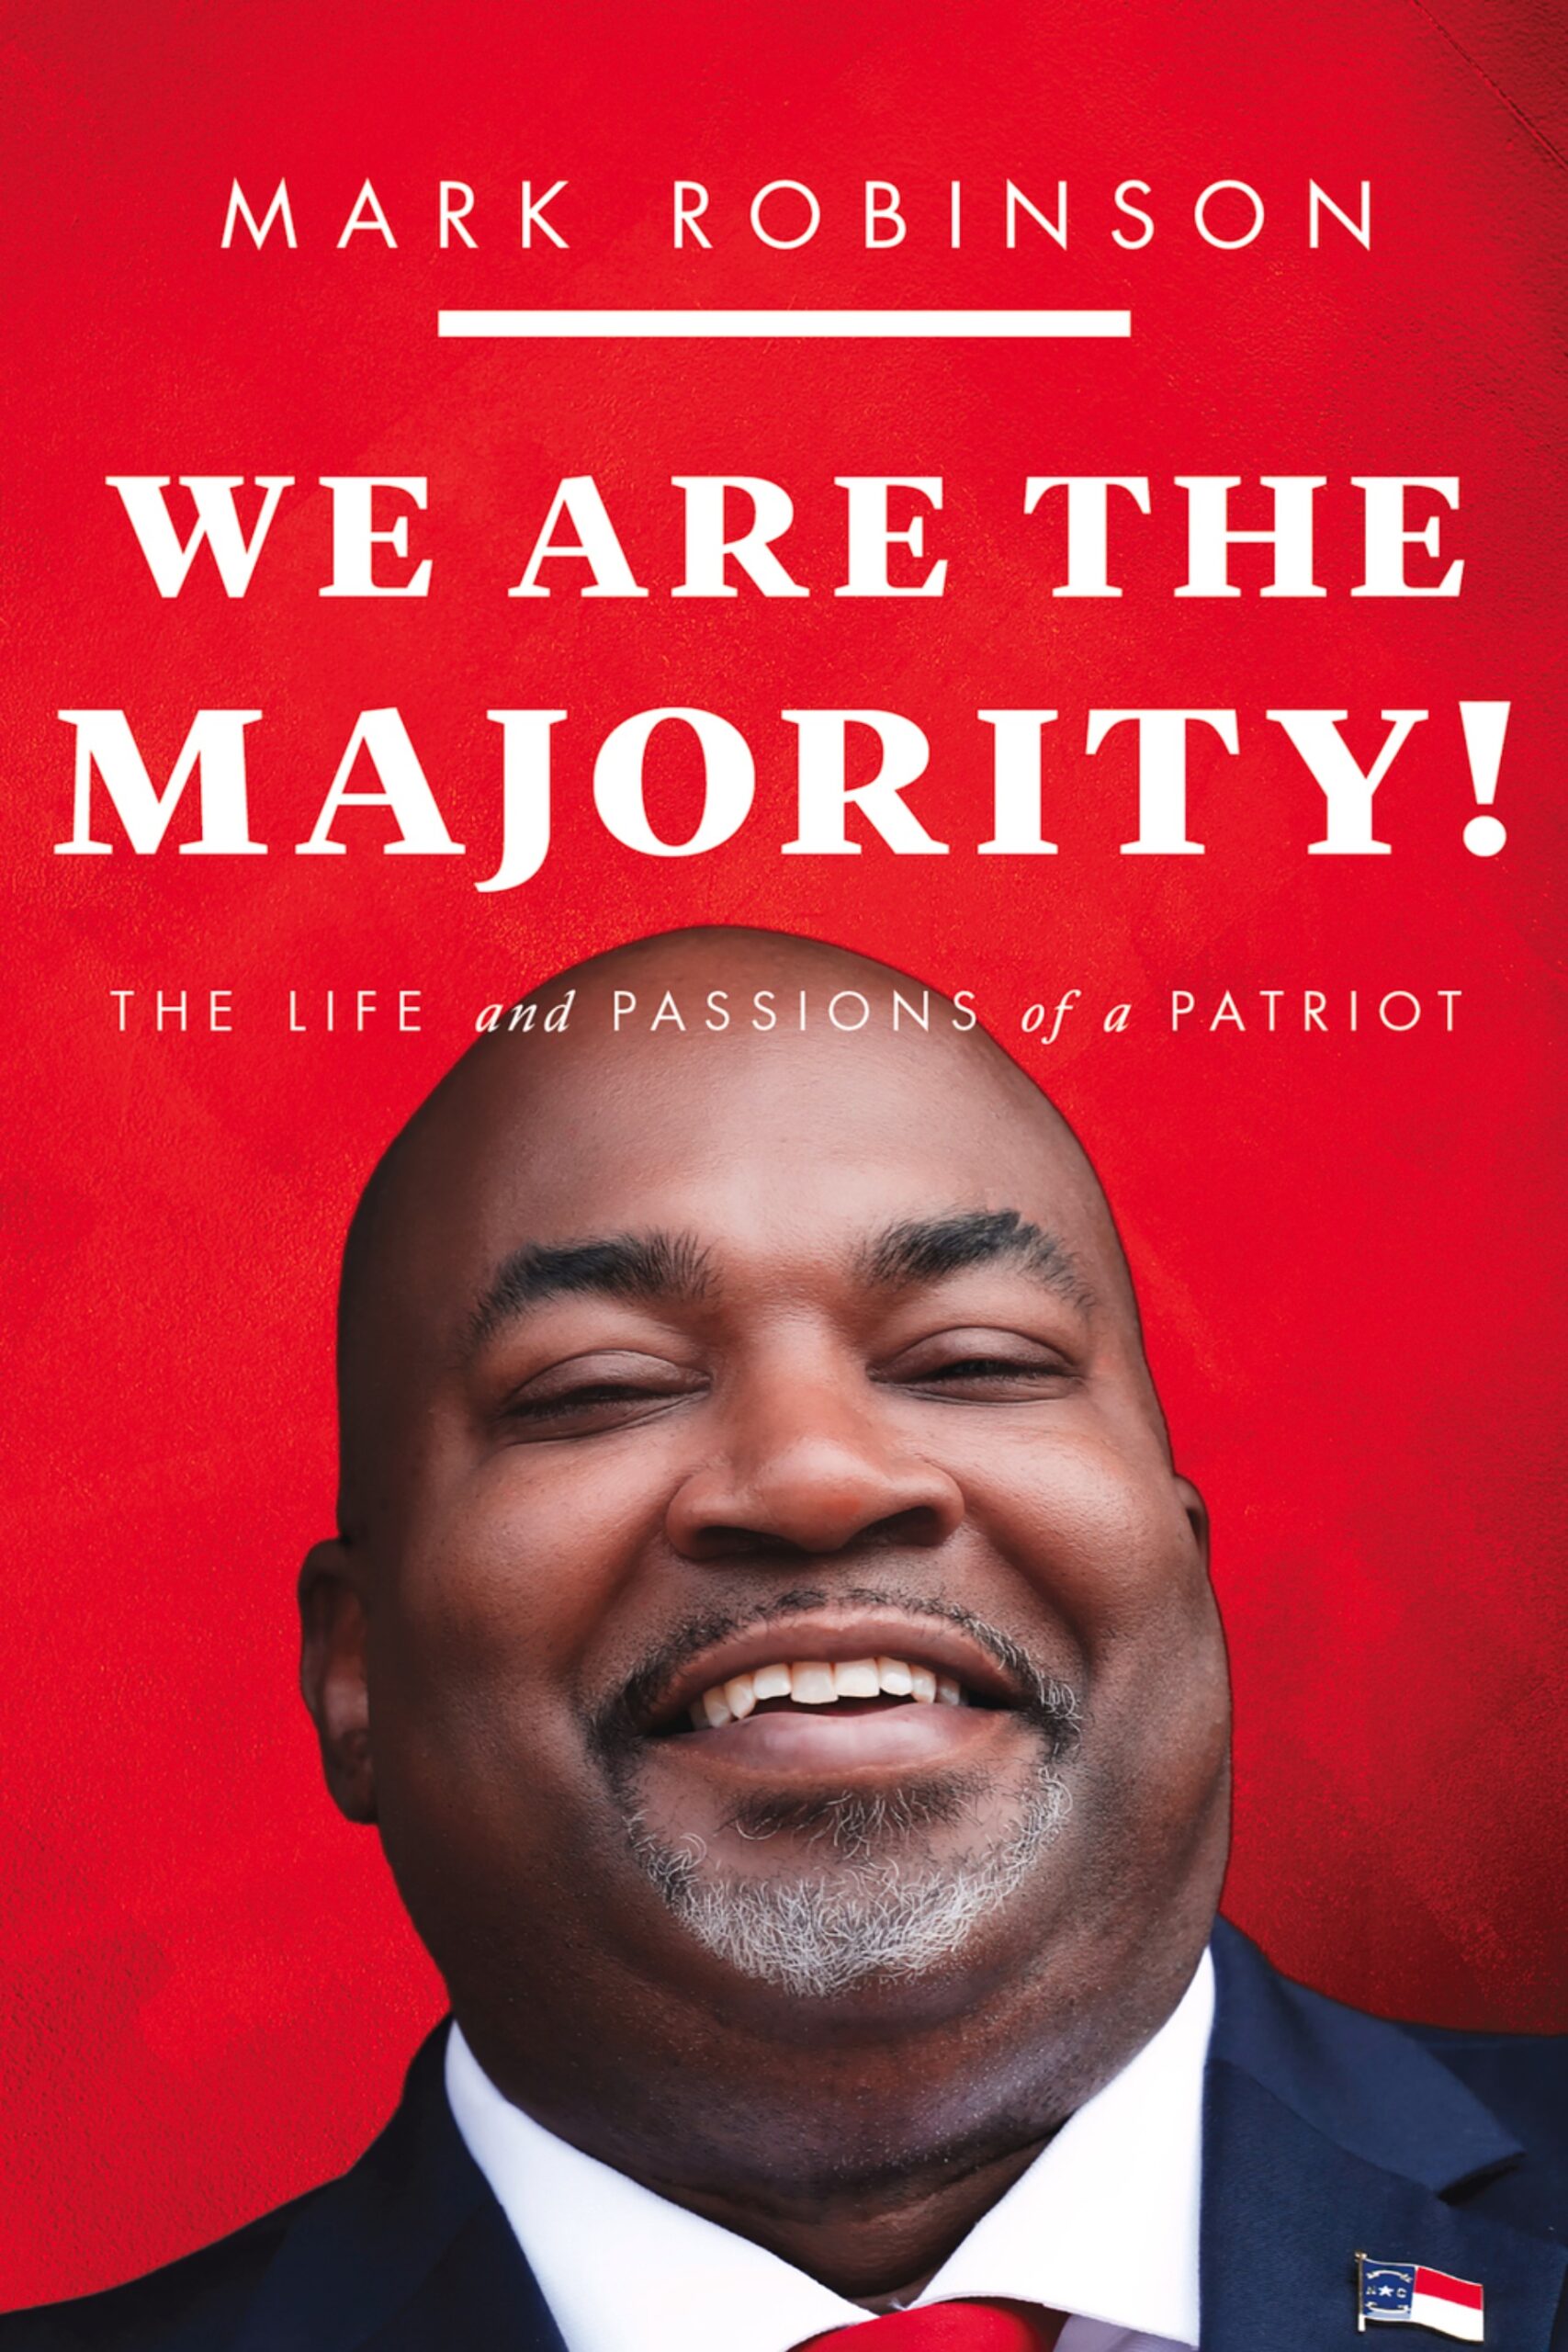 We Are The Majority by Mark Robinson